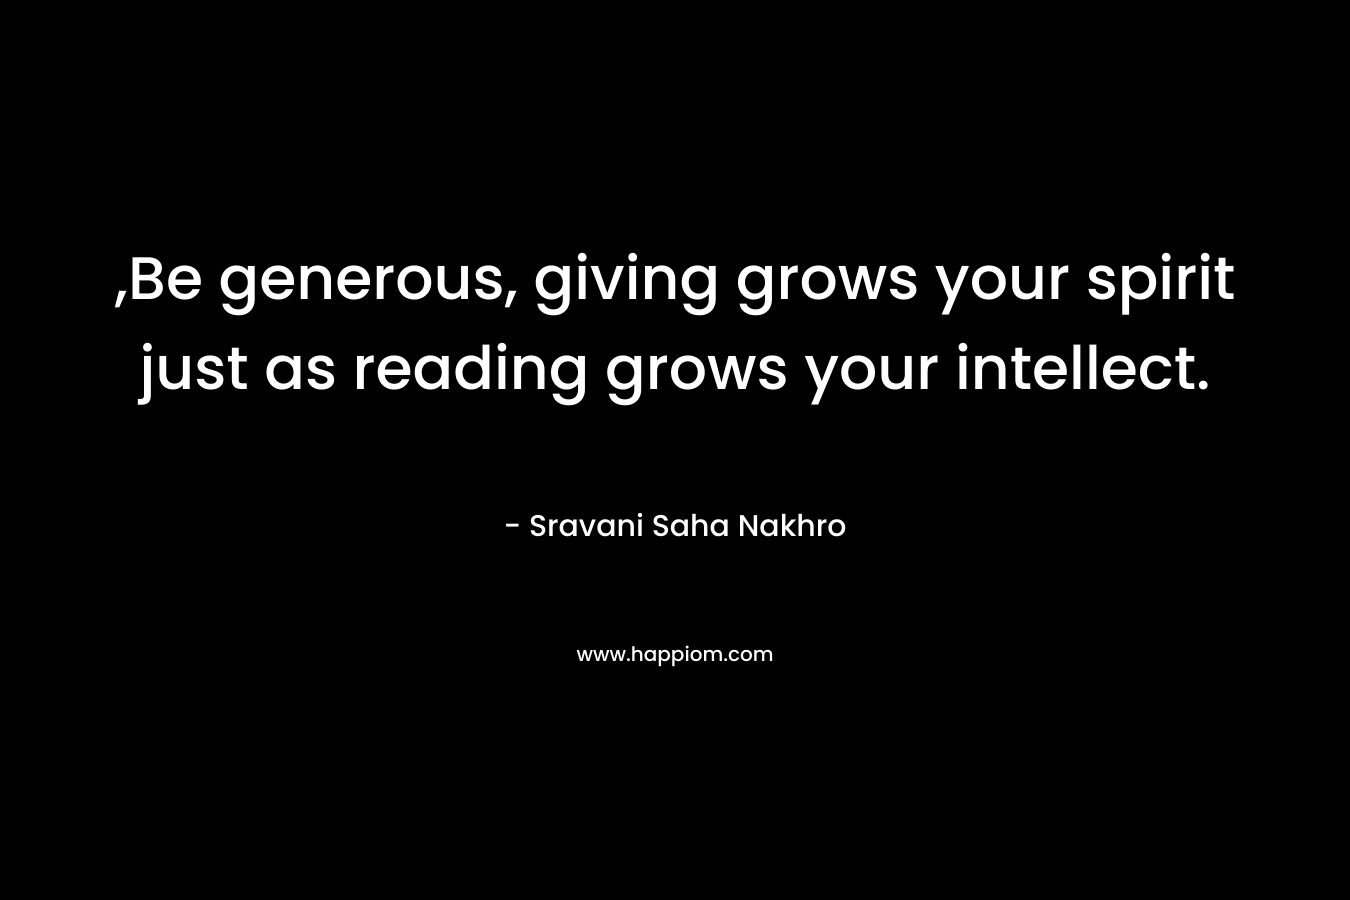 ,Be generous, giving grows your spirit just as reading grows your intellect.